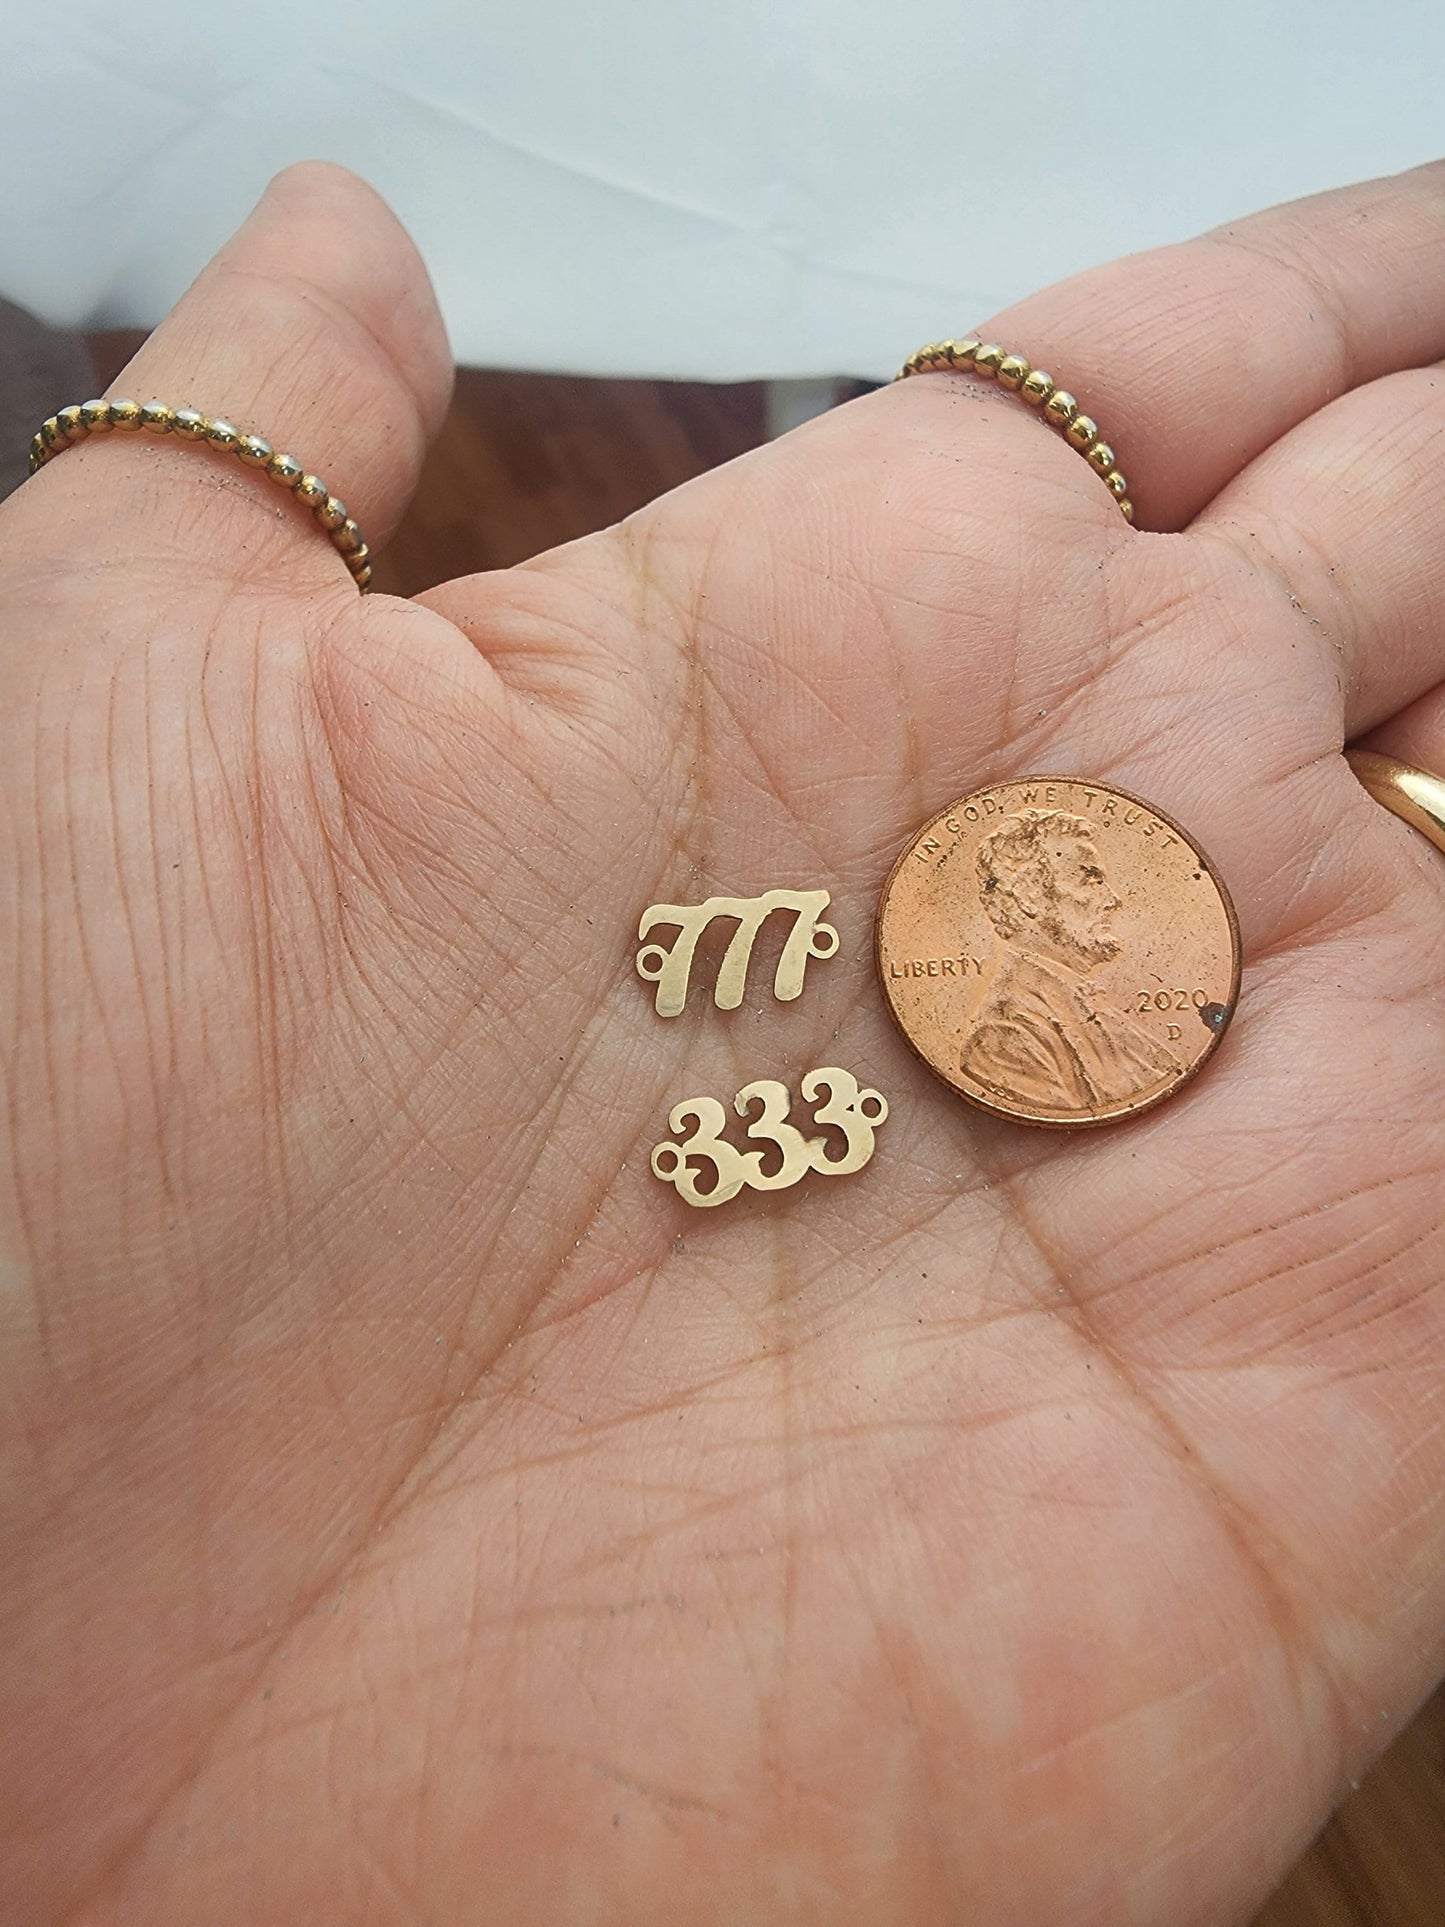 14k gold filled angel numbers connector mini size - 777 666 333 444 555 1111 - permanent jewelry word connectors - charm Supply bulk wholesa